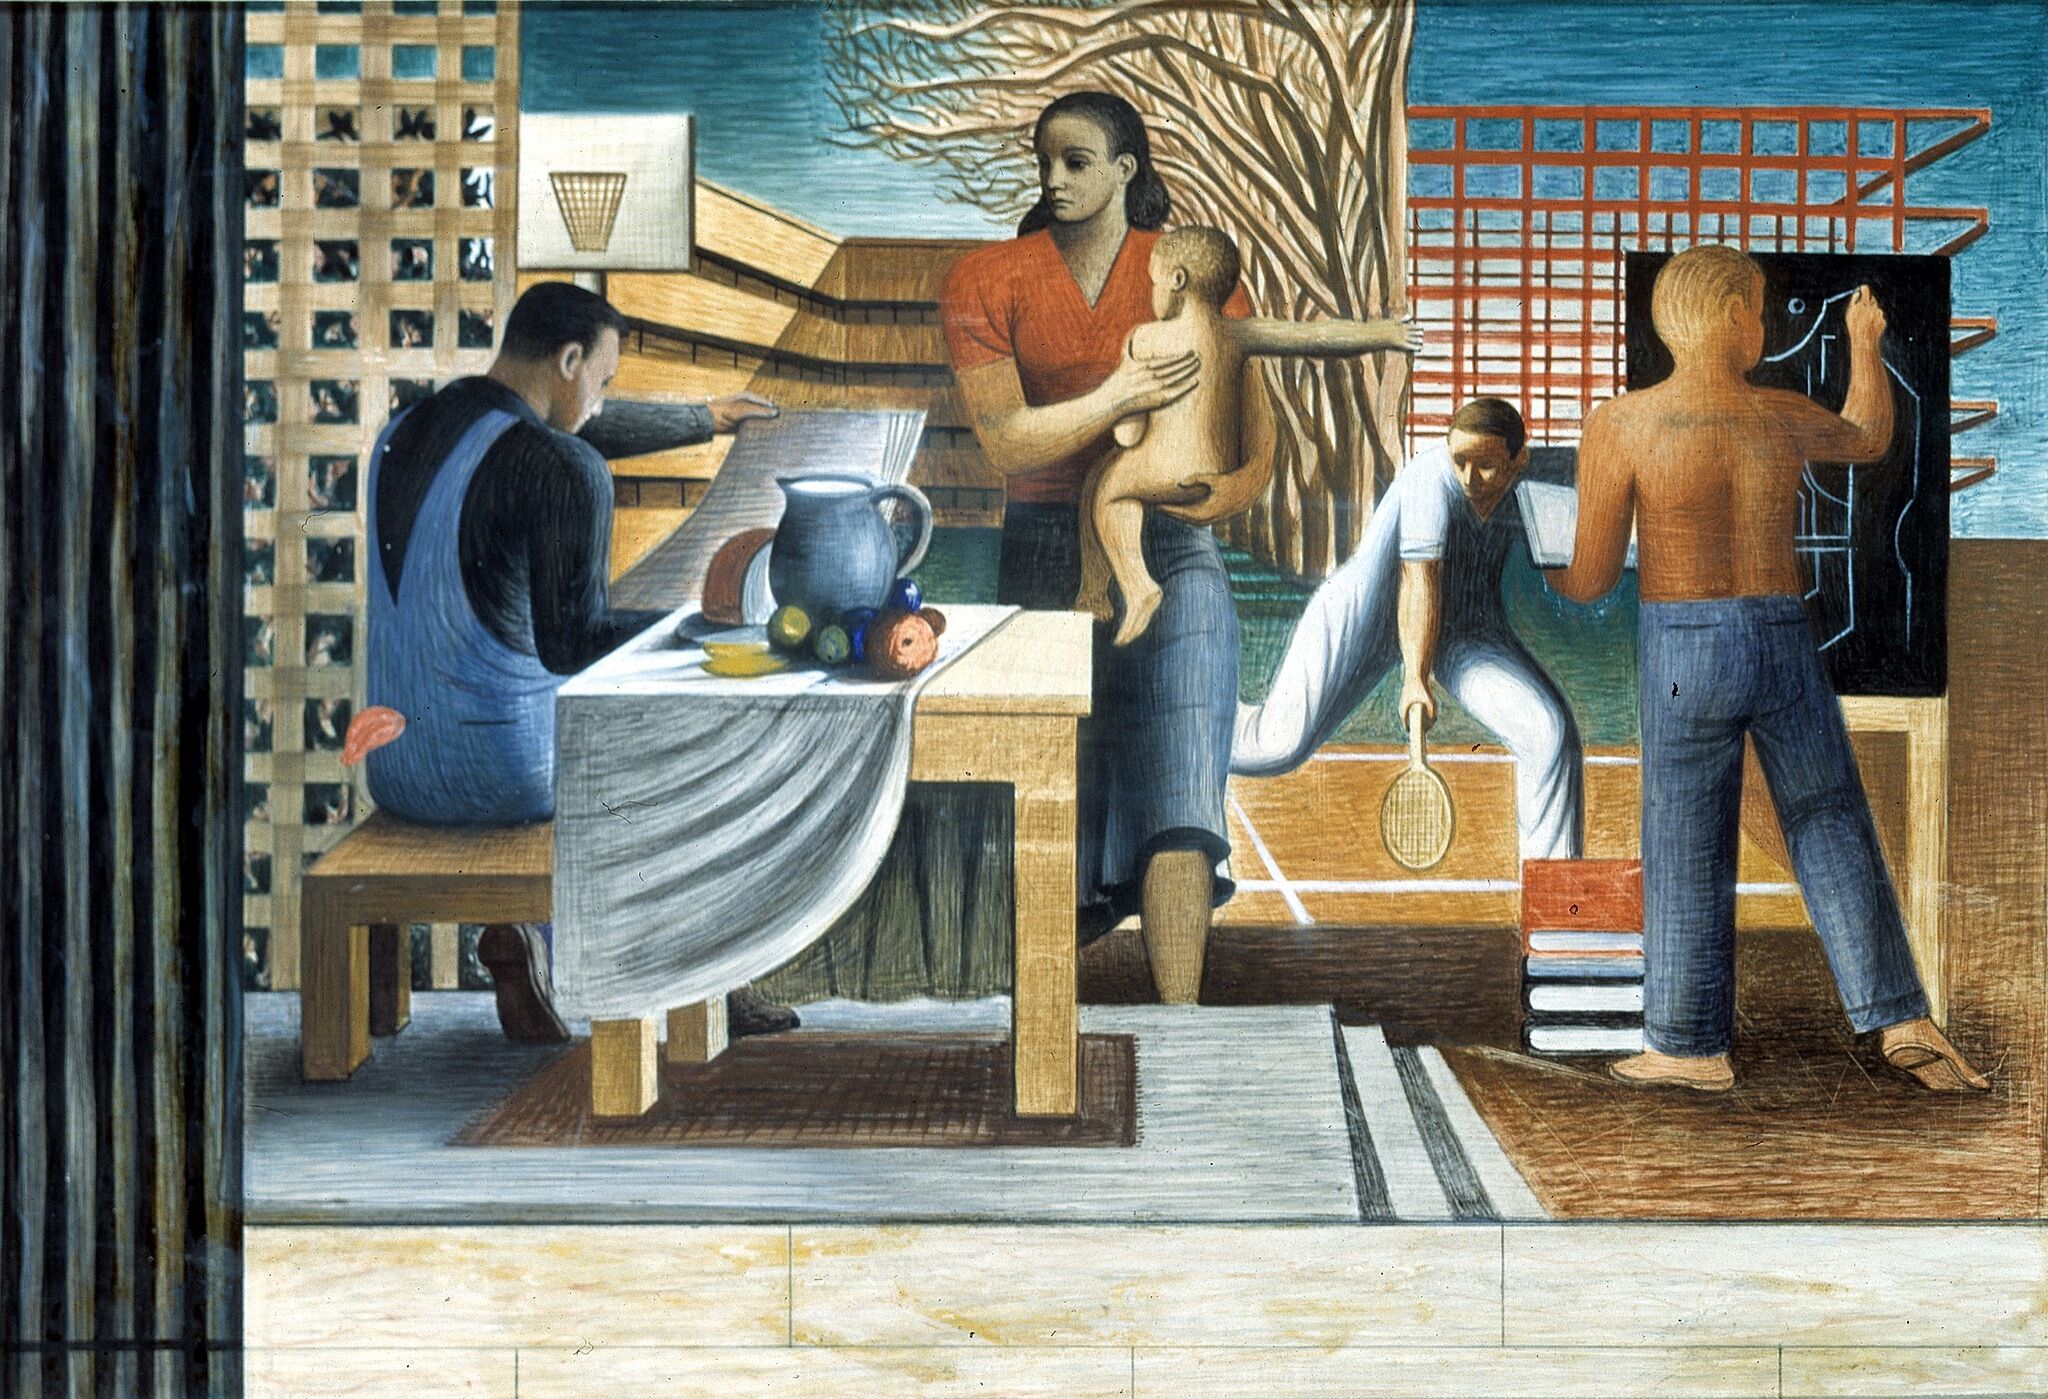 A painting depicting a family in a domestic setting.